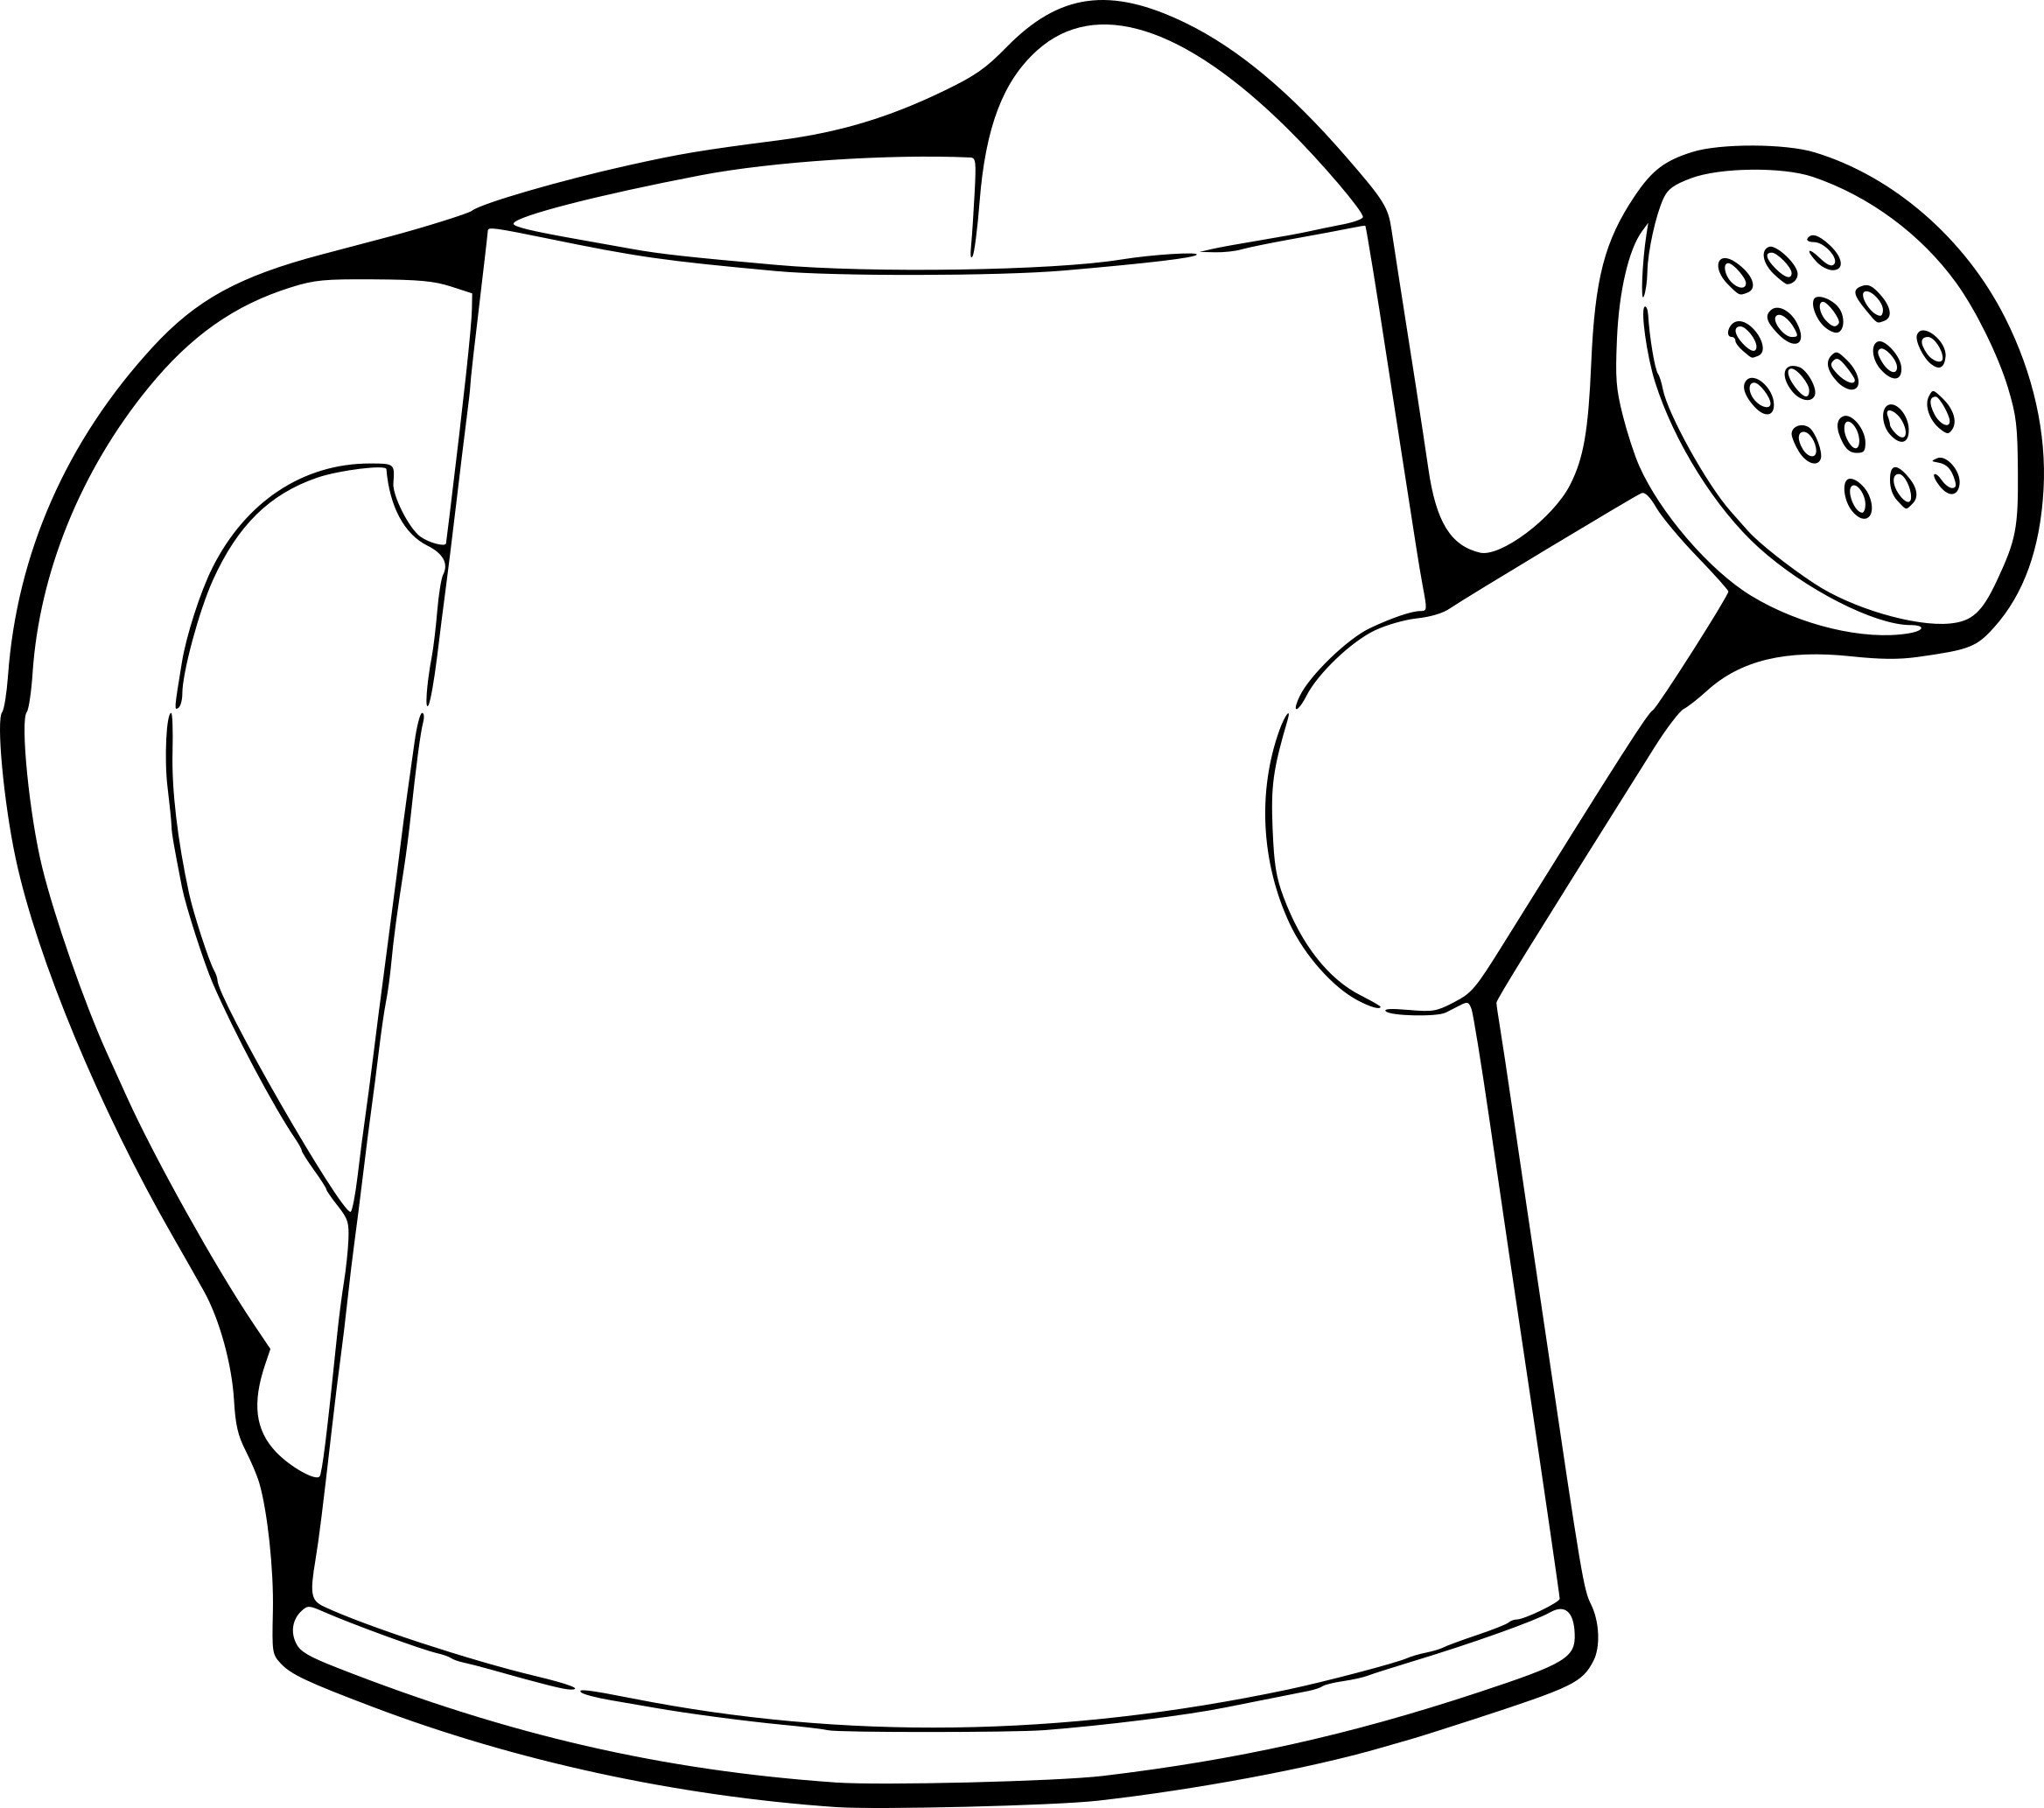 Gorgeous Watering Can Coloring Page for Toddlers